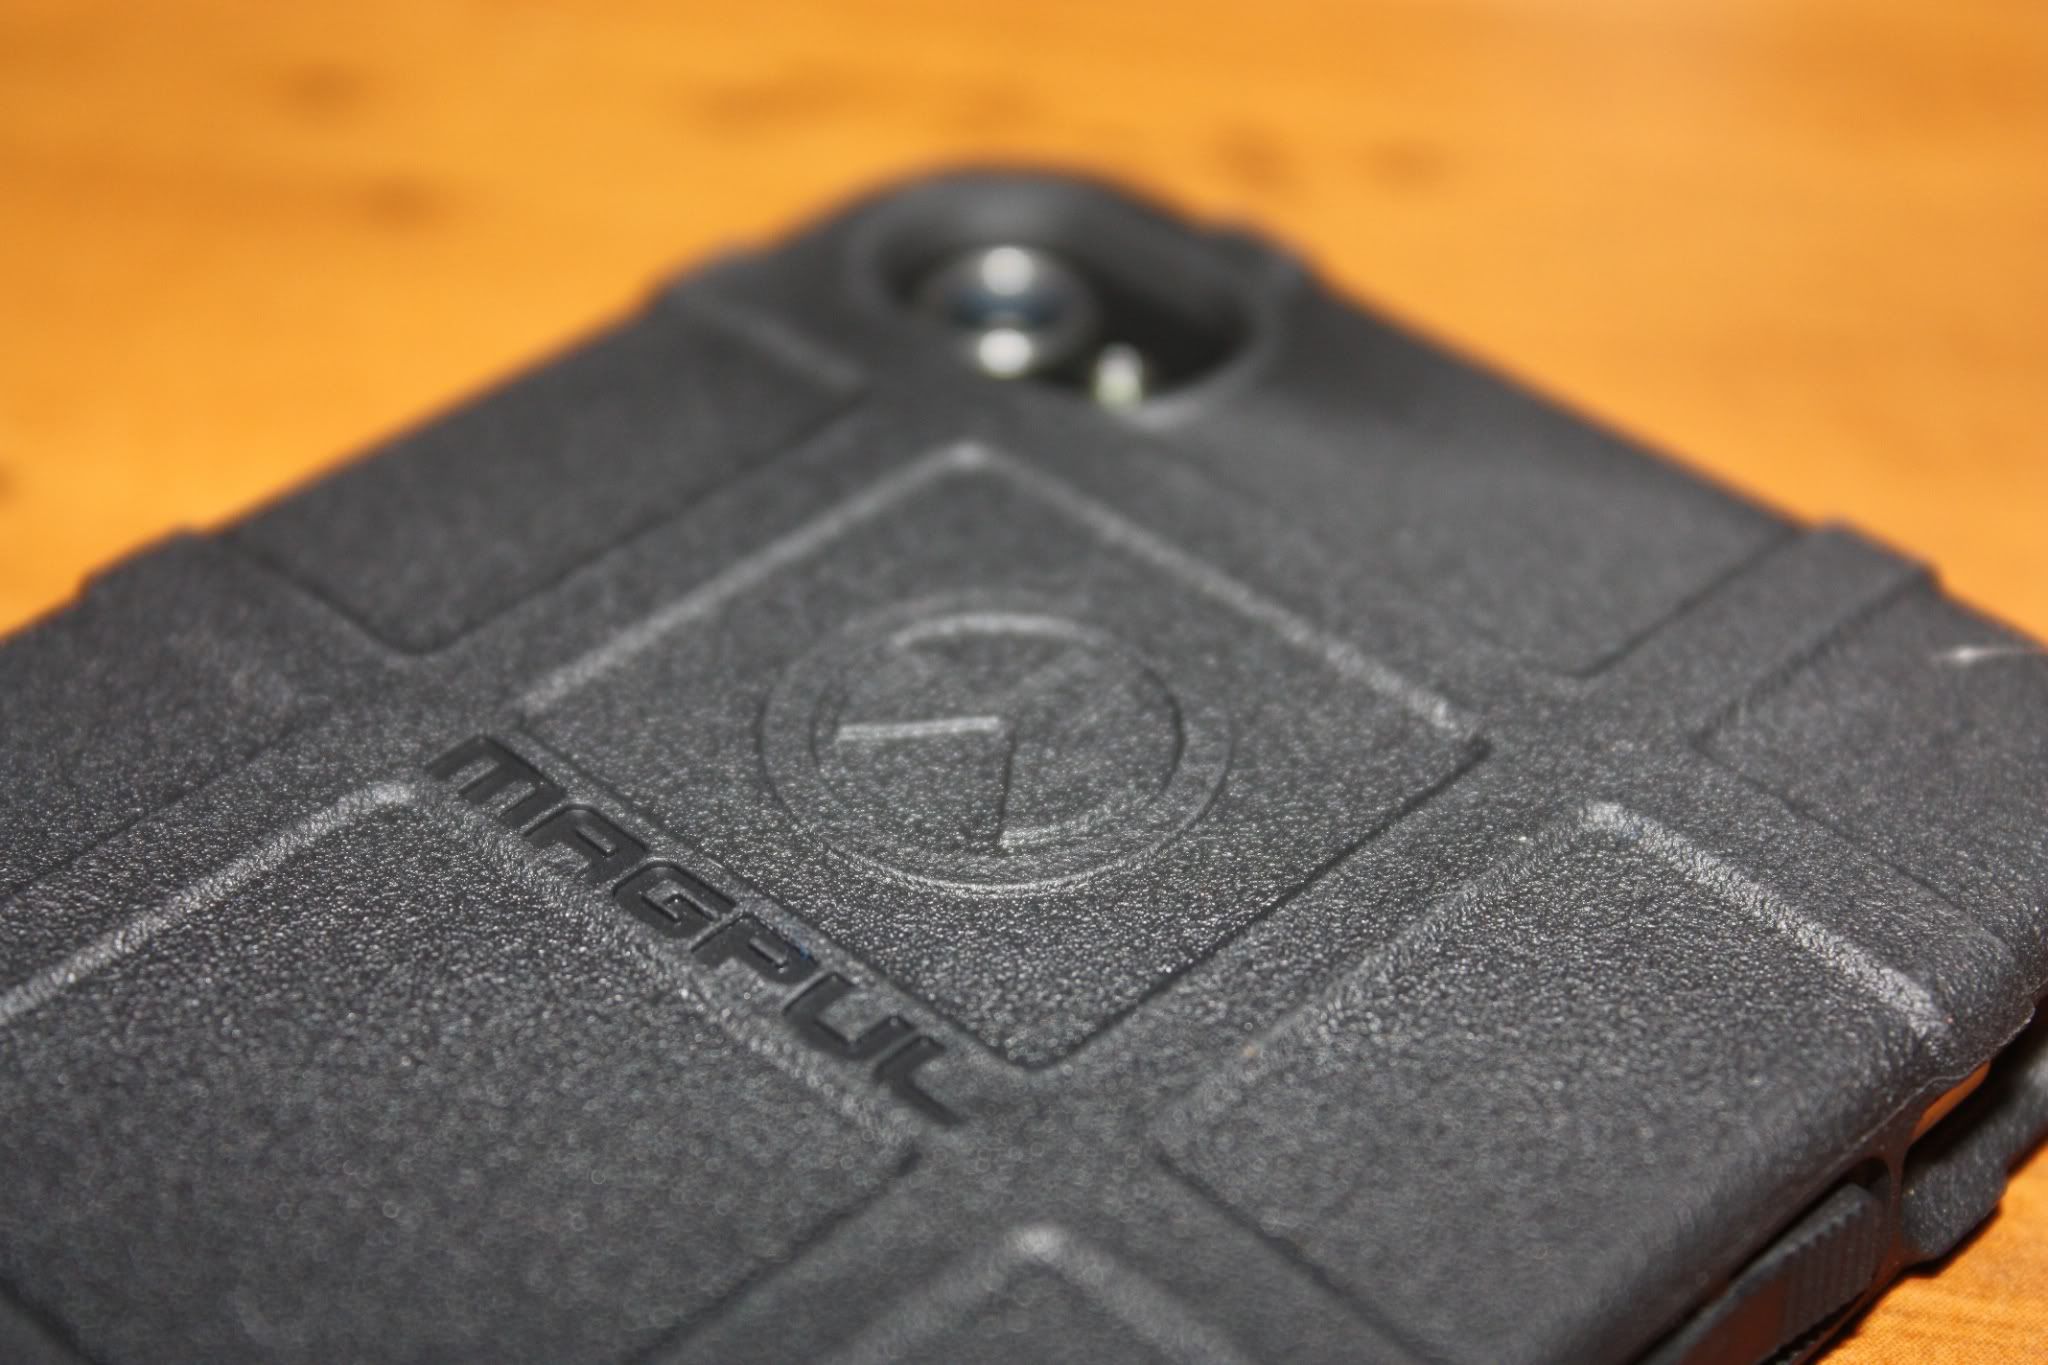 Magpul Field Case Review - iPhone, iPad, iPod Forums at iMore.com